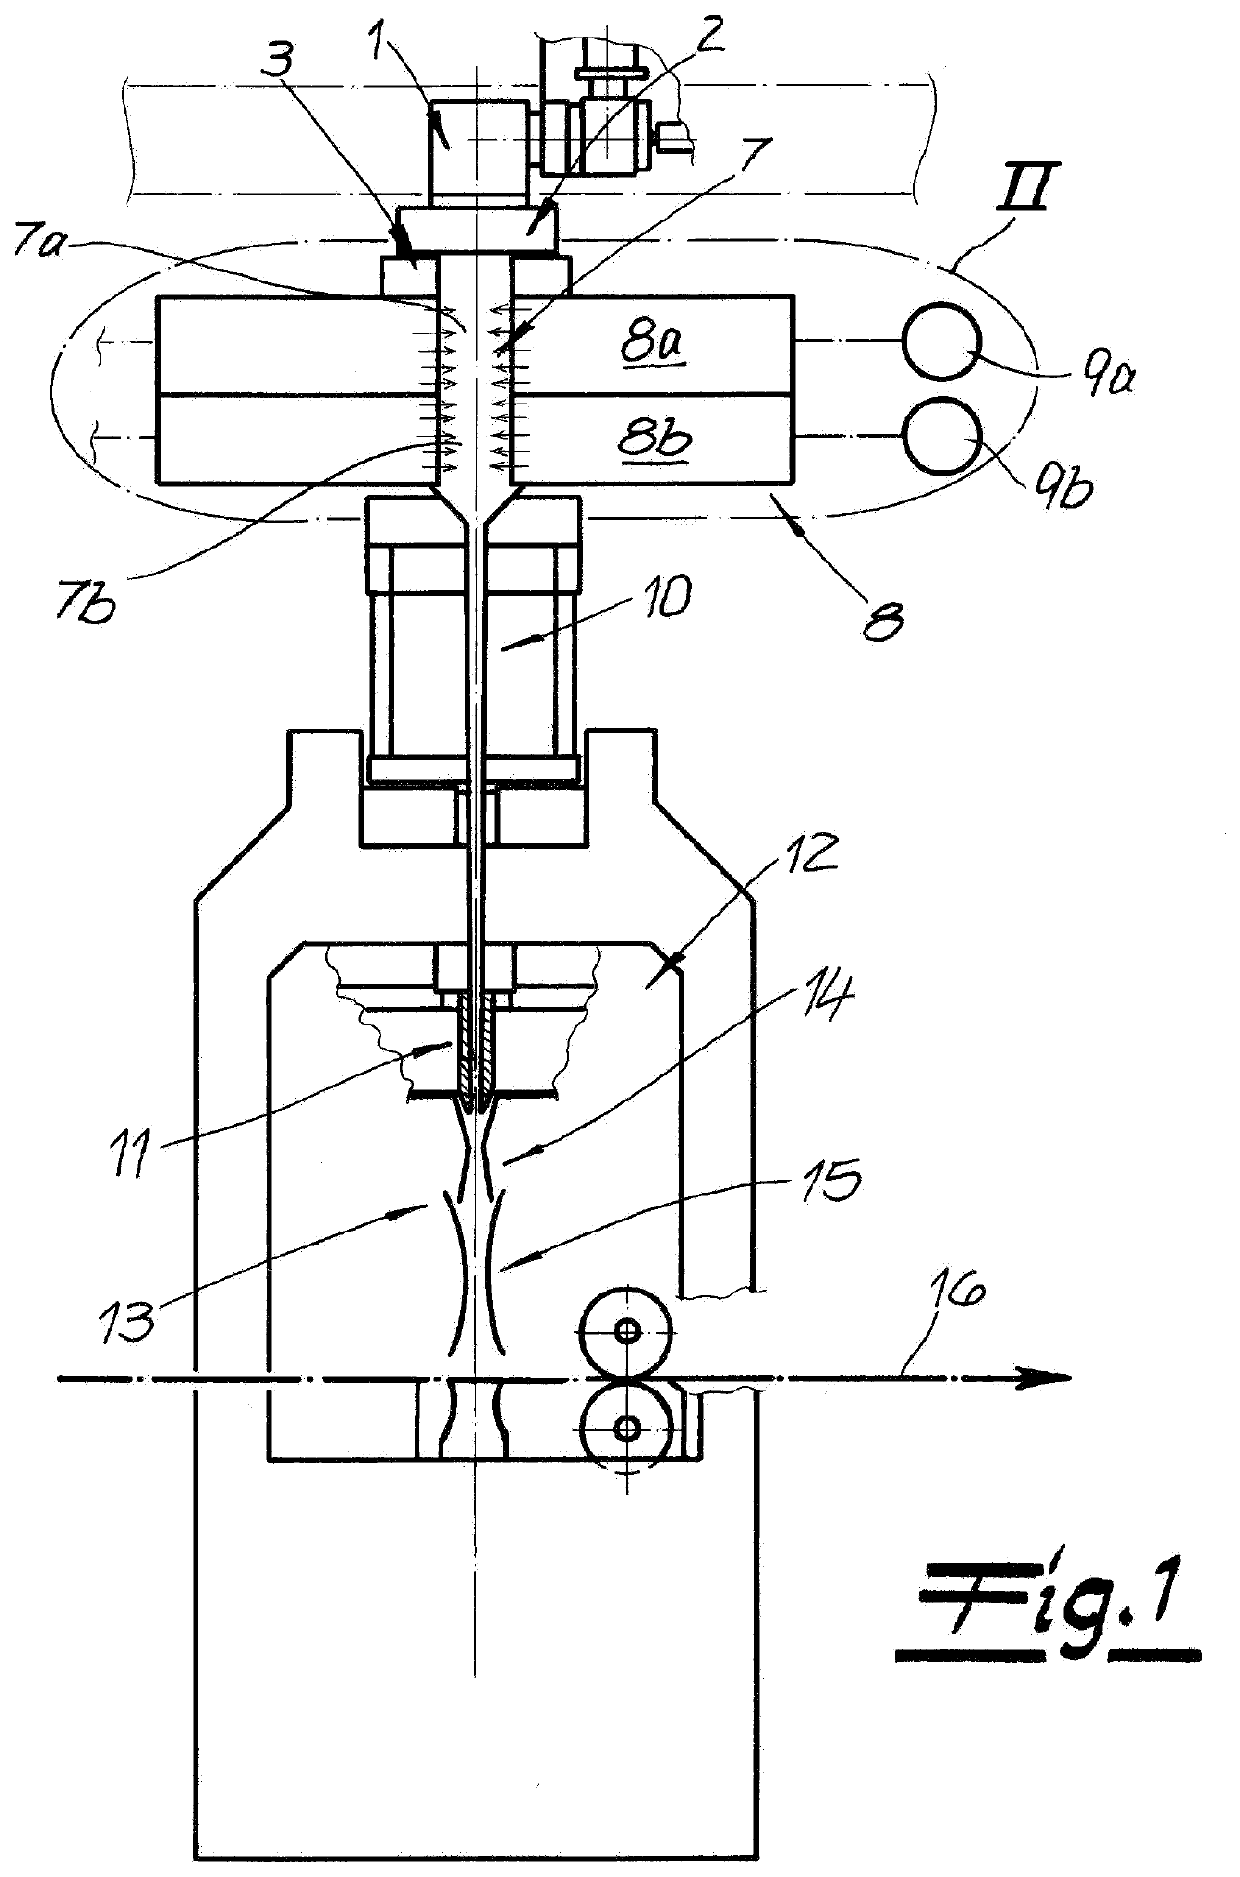 Apparatus for making a spunbond web from filaments